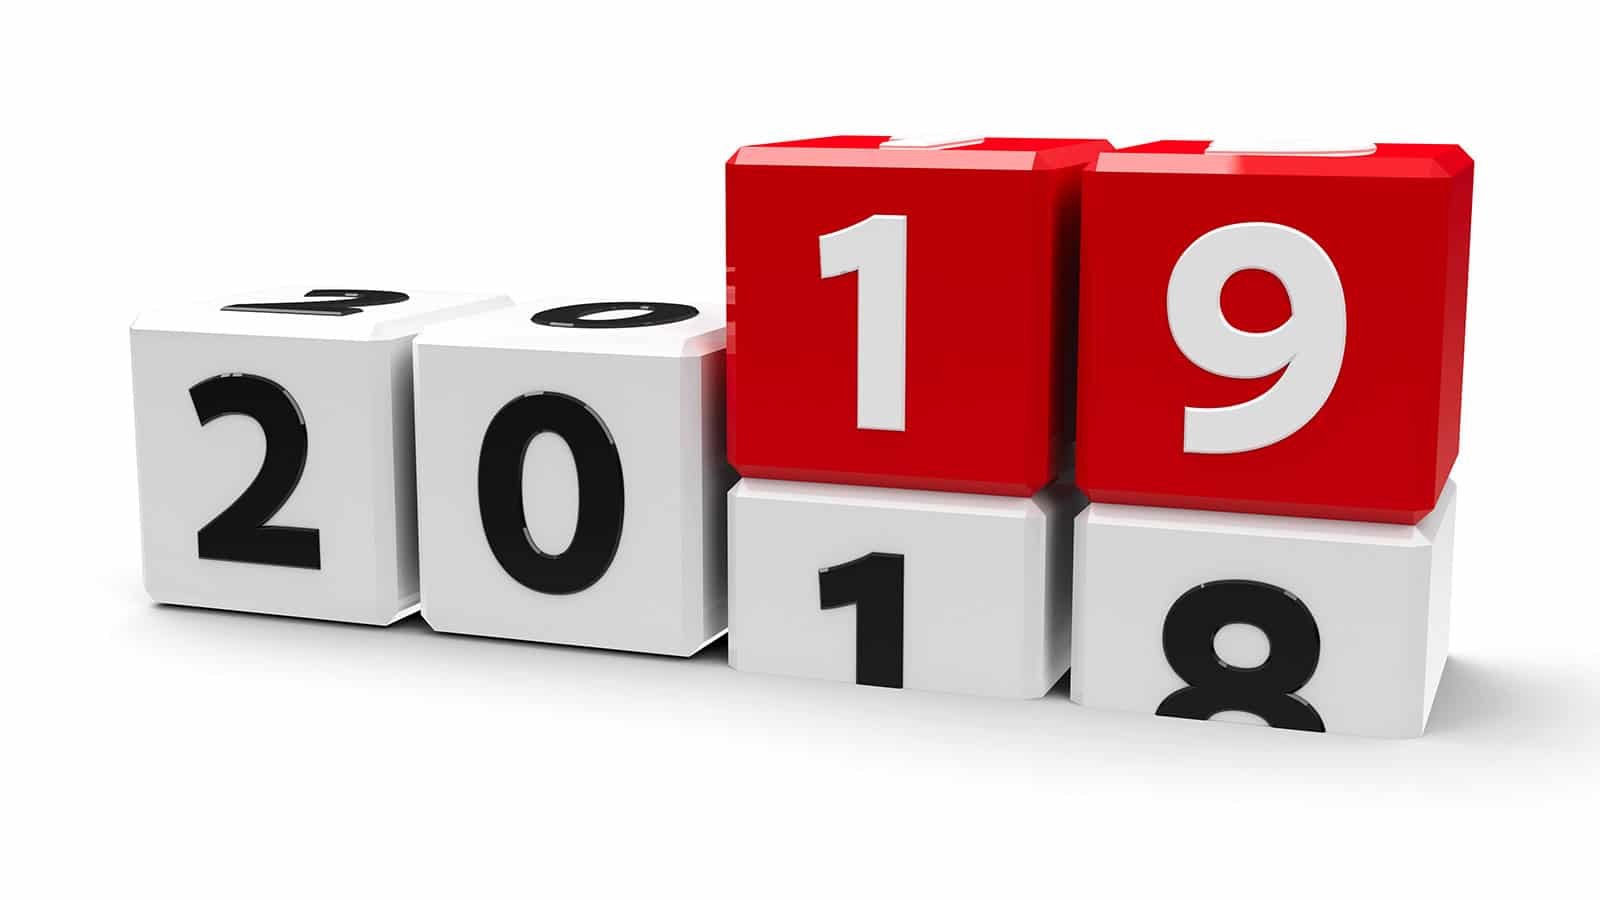 6 effective year end marketing ideas that will catapult brand retention into the new year